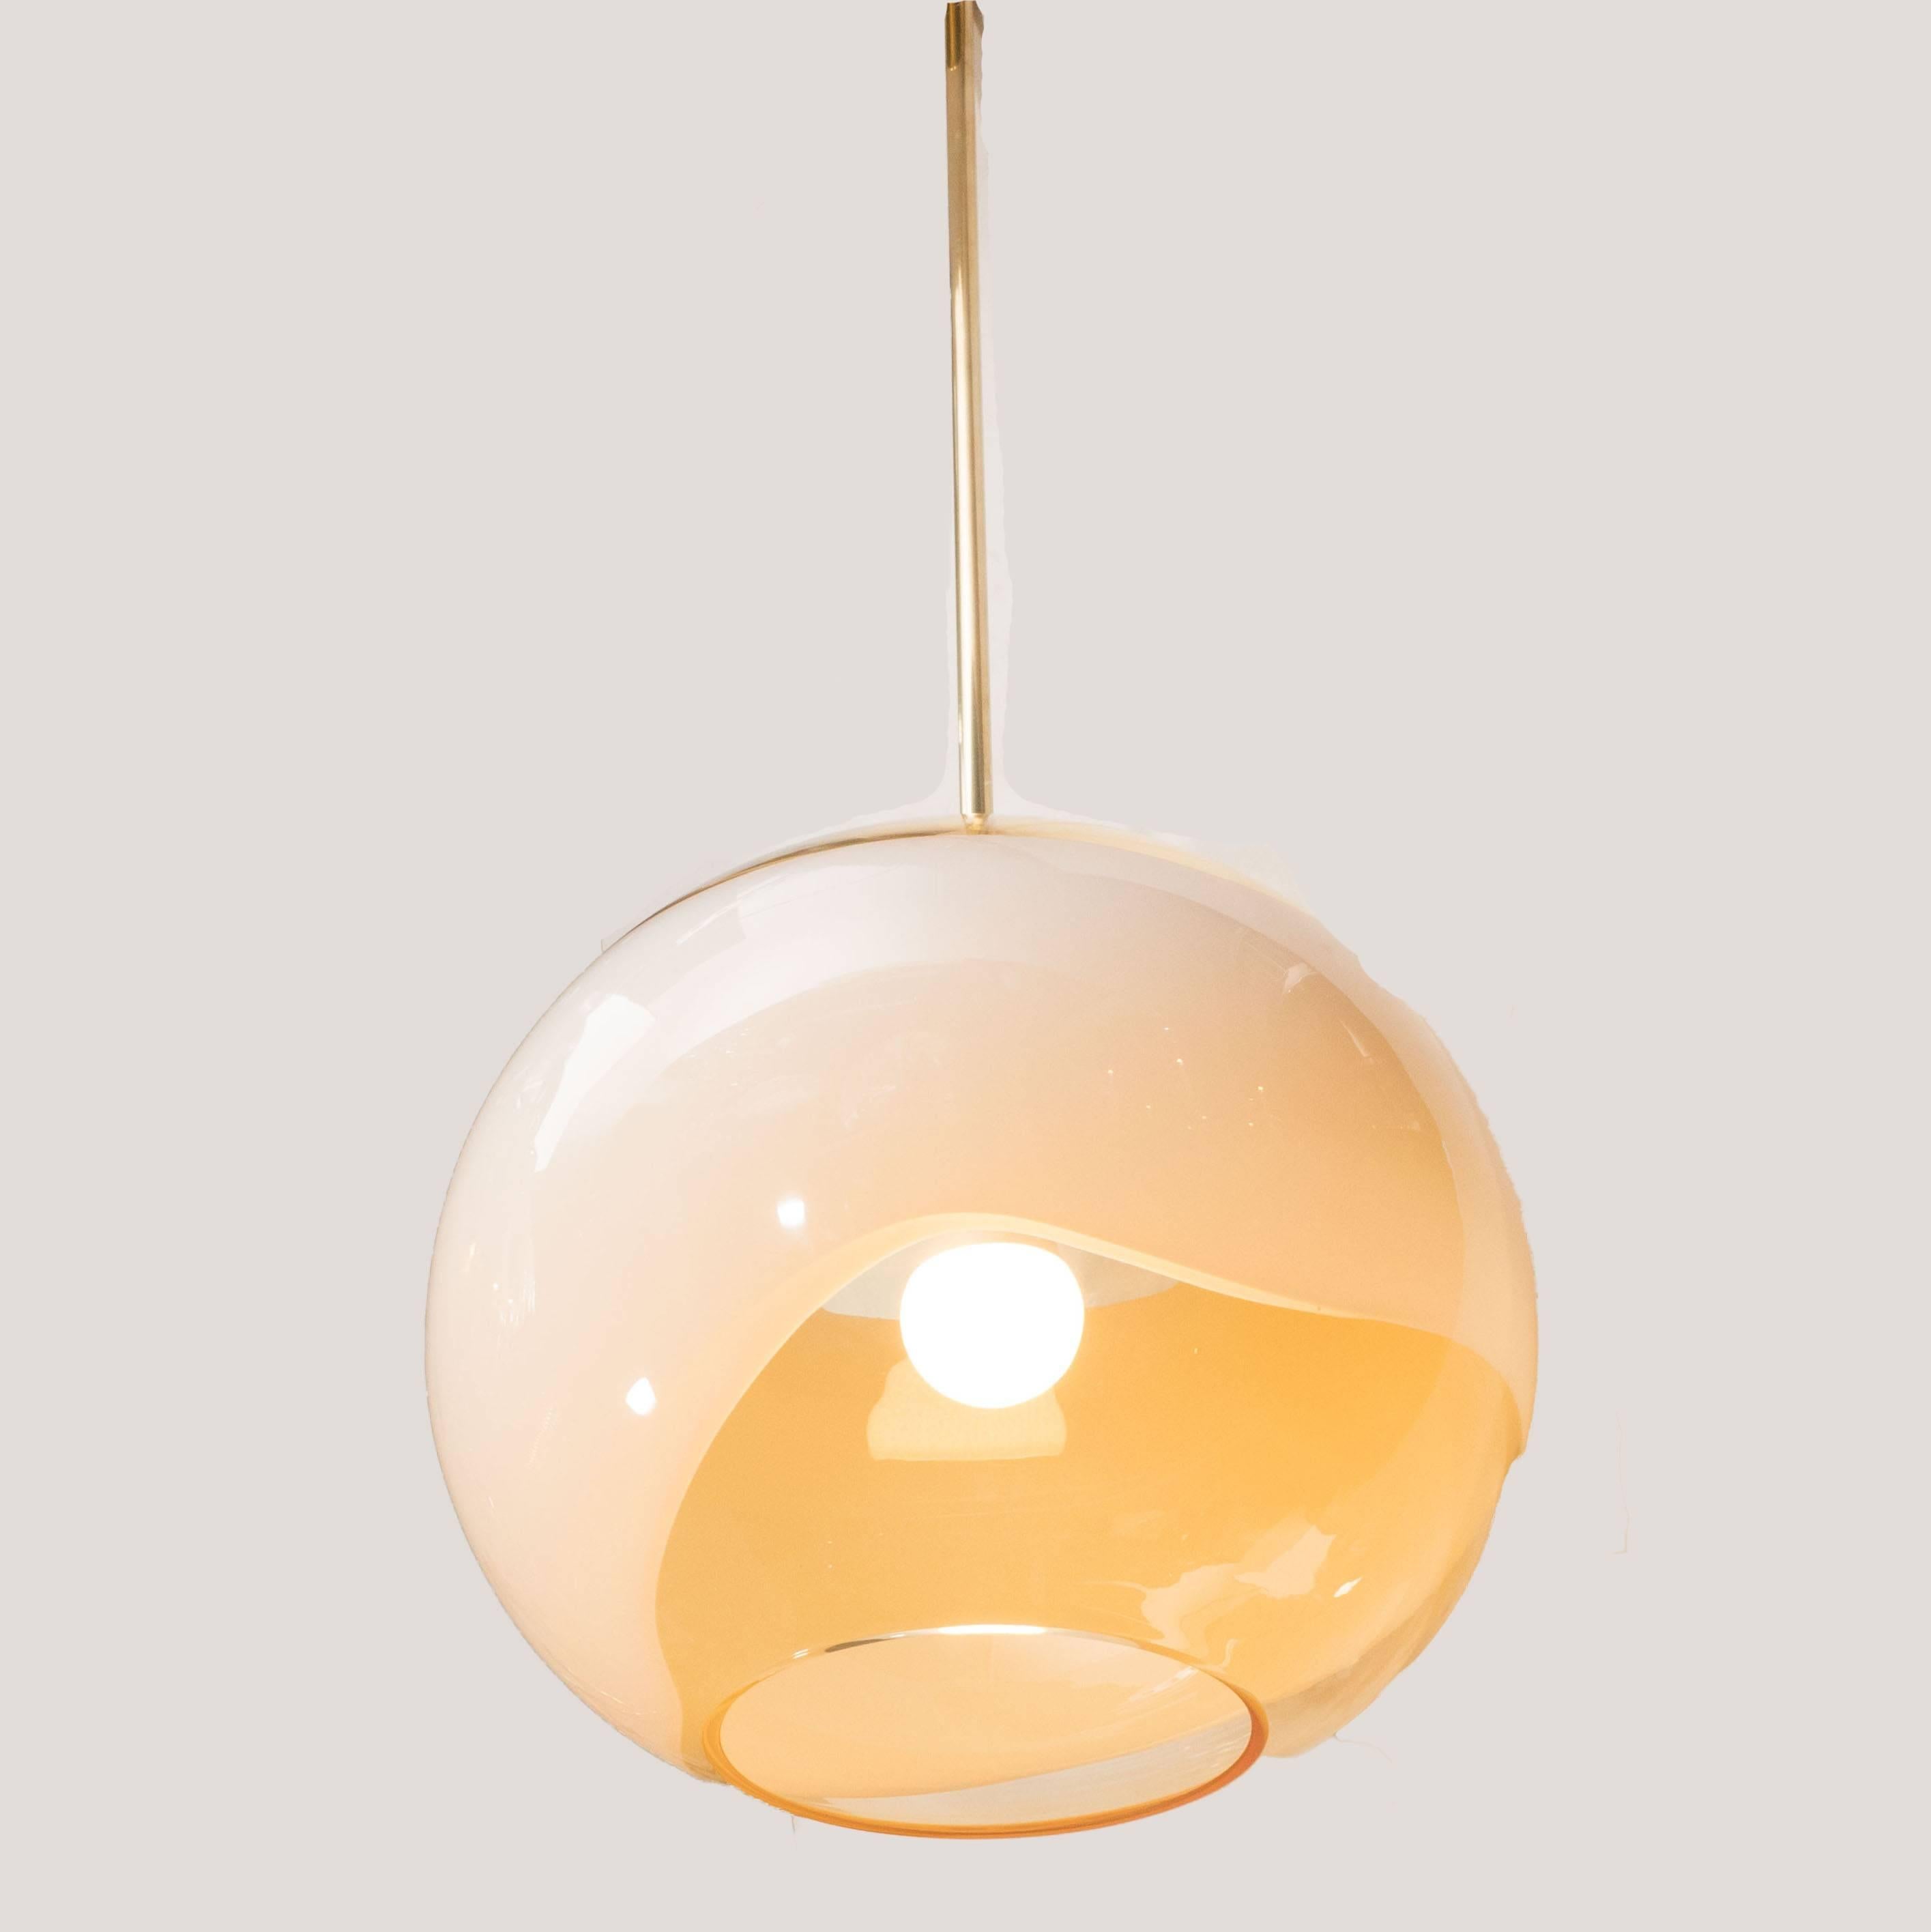 Late 20th Century Mid-Century Modern Murano Pendant with Opaque White and Translucent Amber Glass